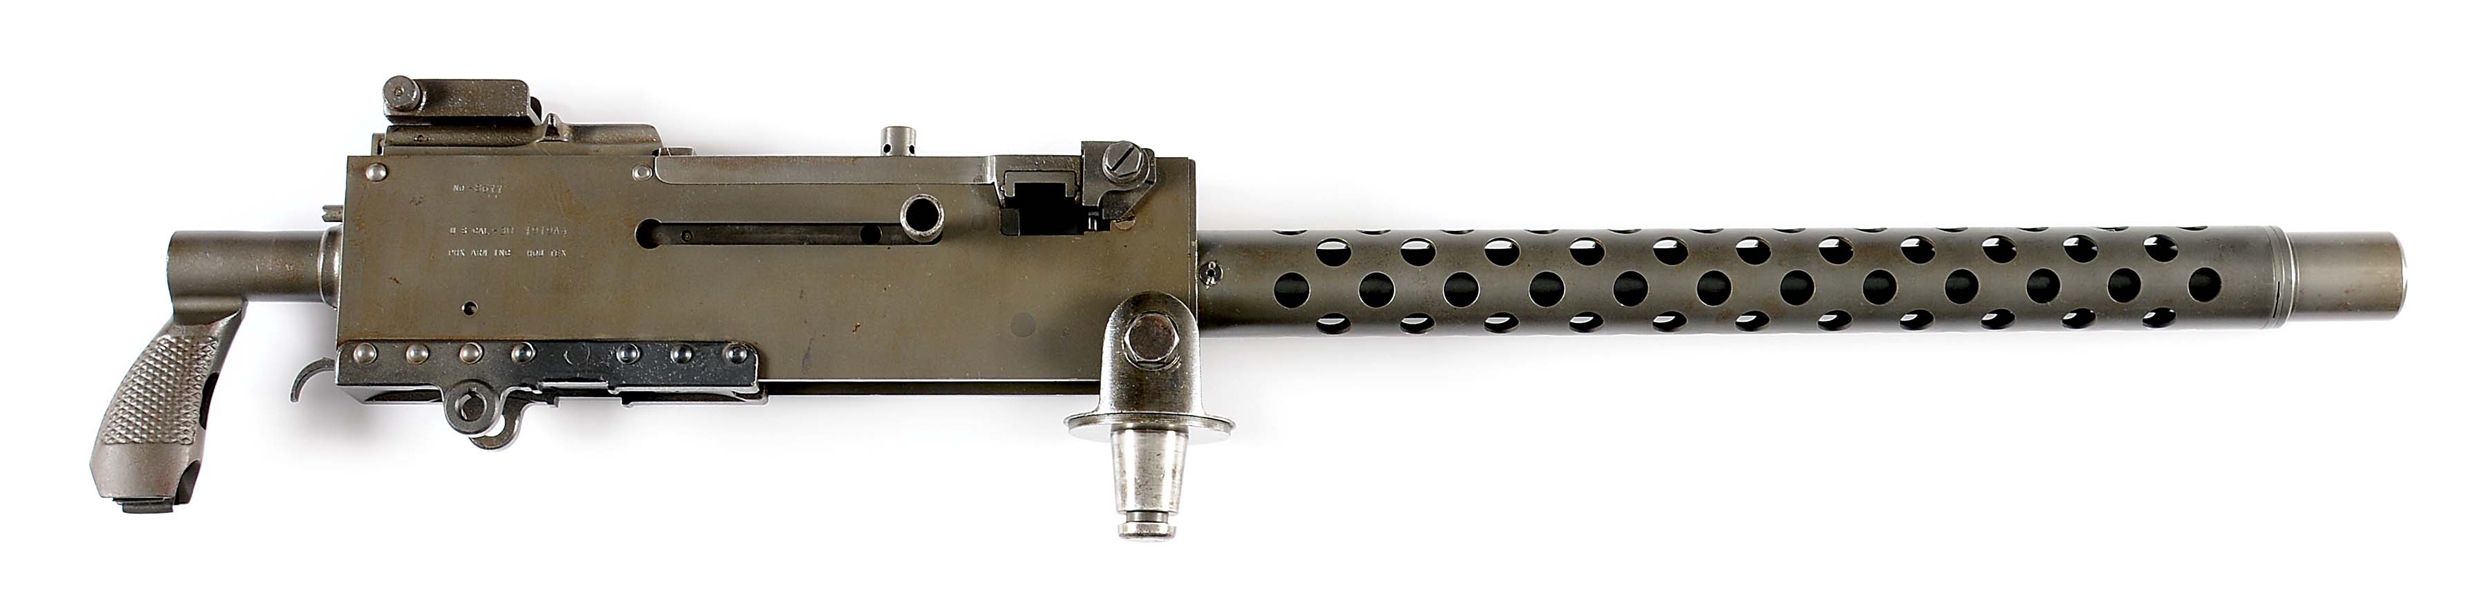 (N) FINE PHOENIX ARMORY SIDEPLATE BROWNING MODEL 1919A4 MACHINE GUN (FULLY TRANSFERABLE).